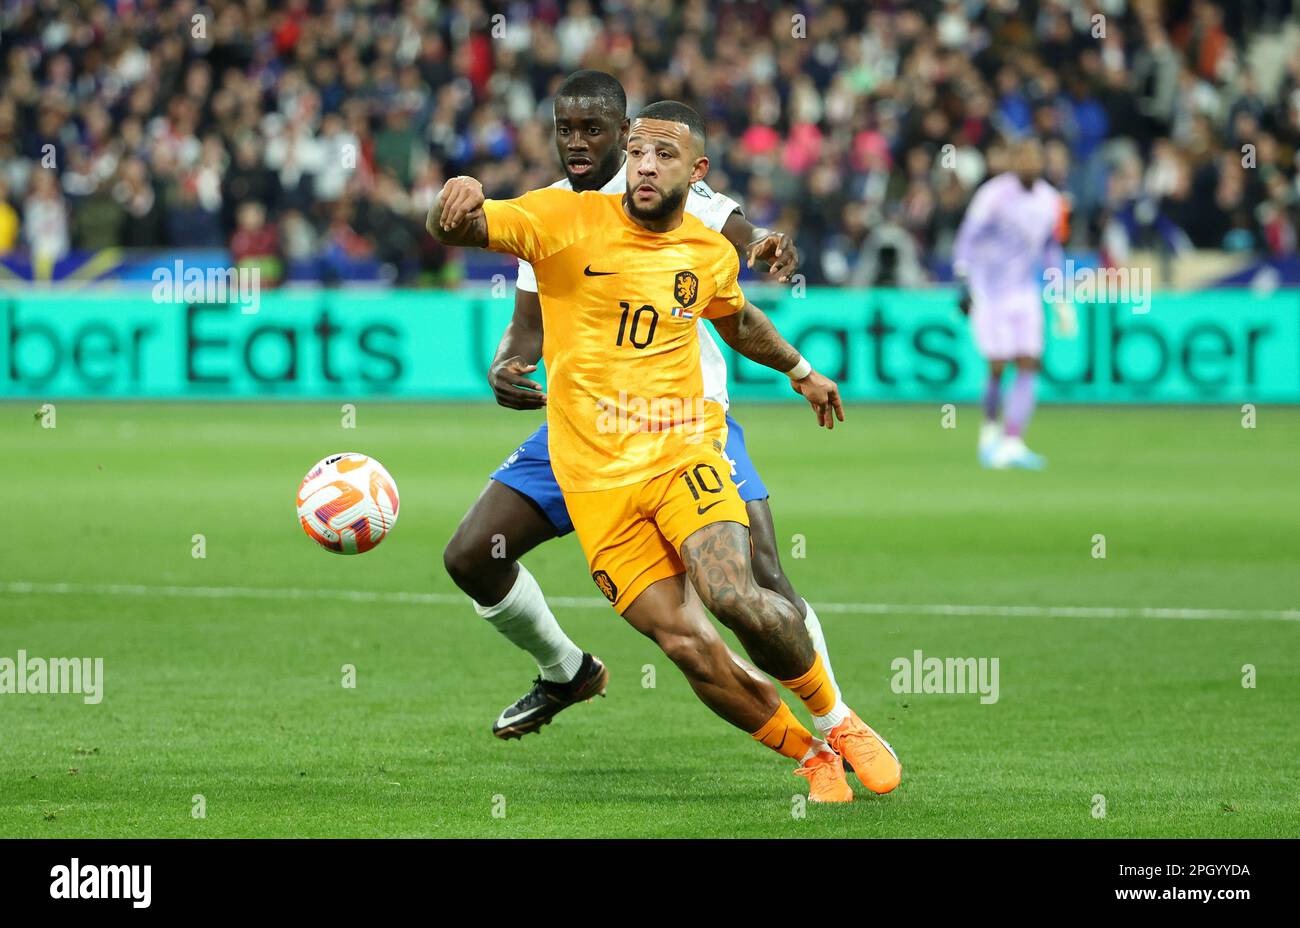 Saint Denis France 25th Mar 2023 Memphis Depay Of Netherlands Dayot Upamecano Of France During The Uefa Euro 2024 European Qualifiers Group B Football Match Between France And Netherlands On March 24 2023 At Stade De France In Saint Denis Near Paris France Photo Jean Catuffedppi Credit Dppi Mediaalamy Live News 2PGYYDA 